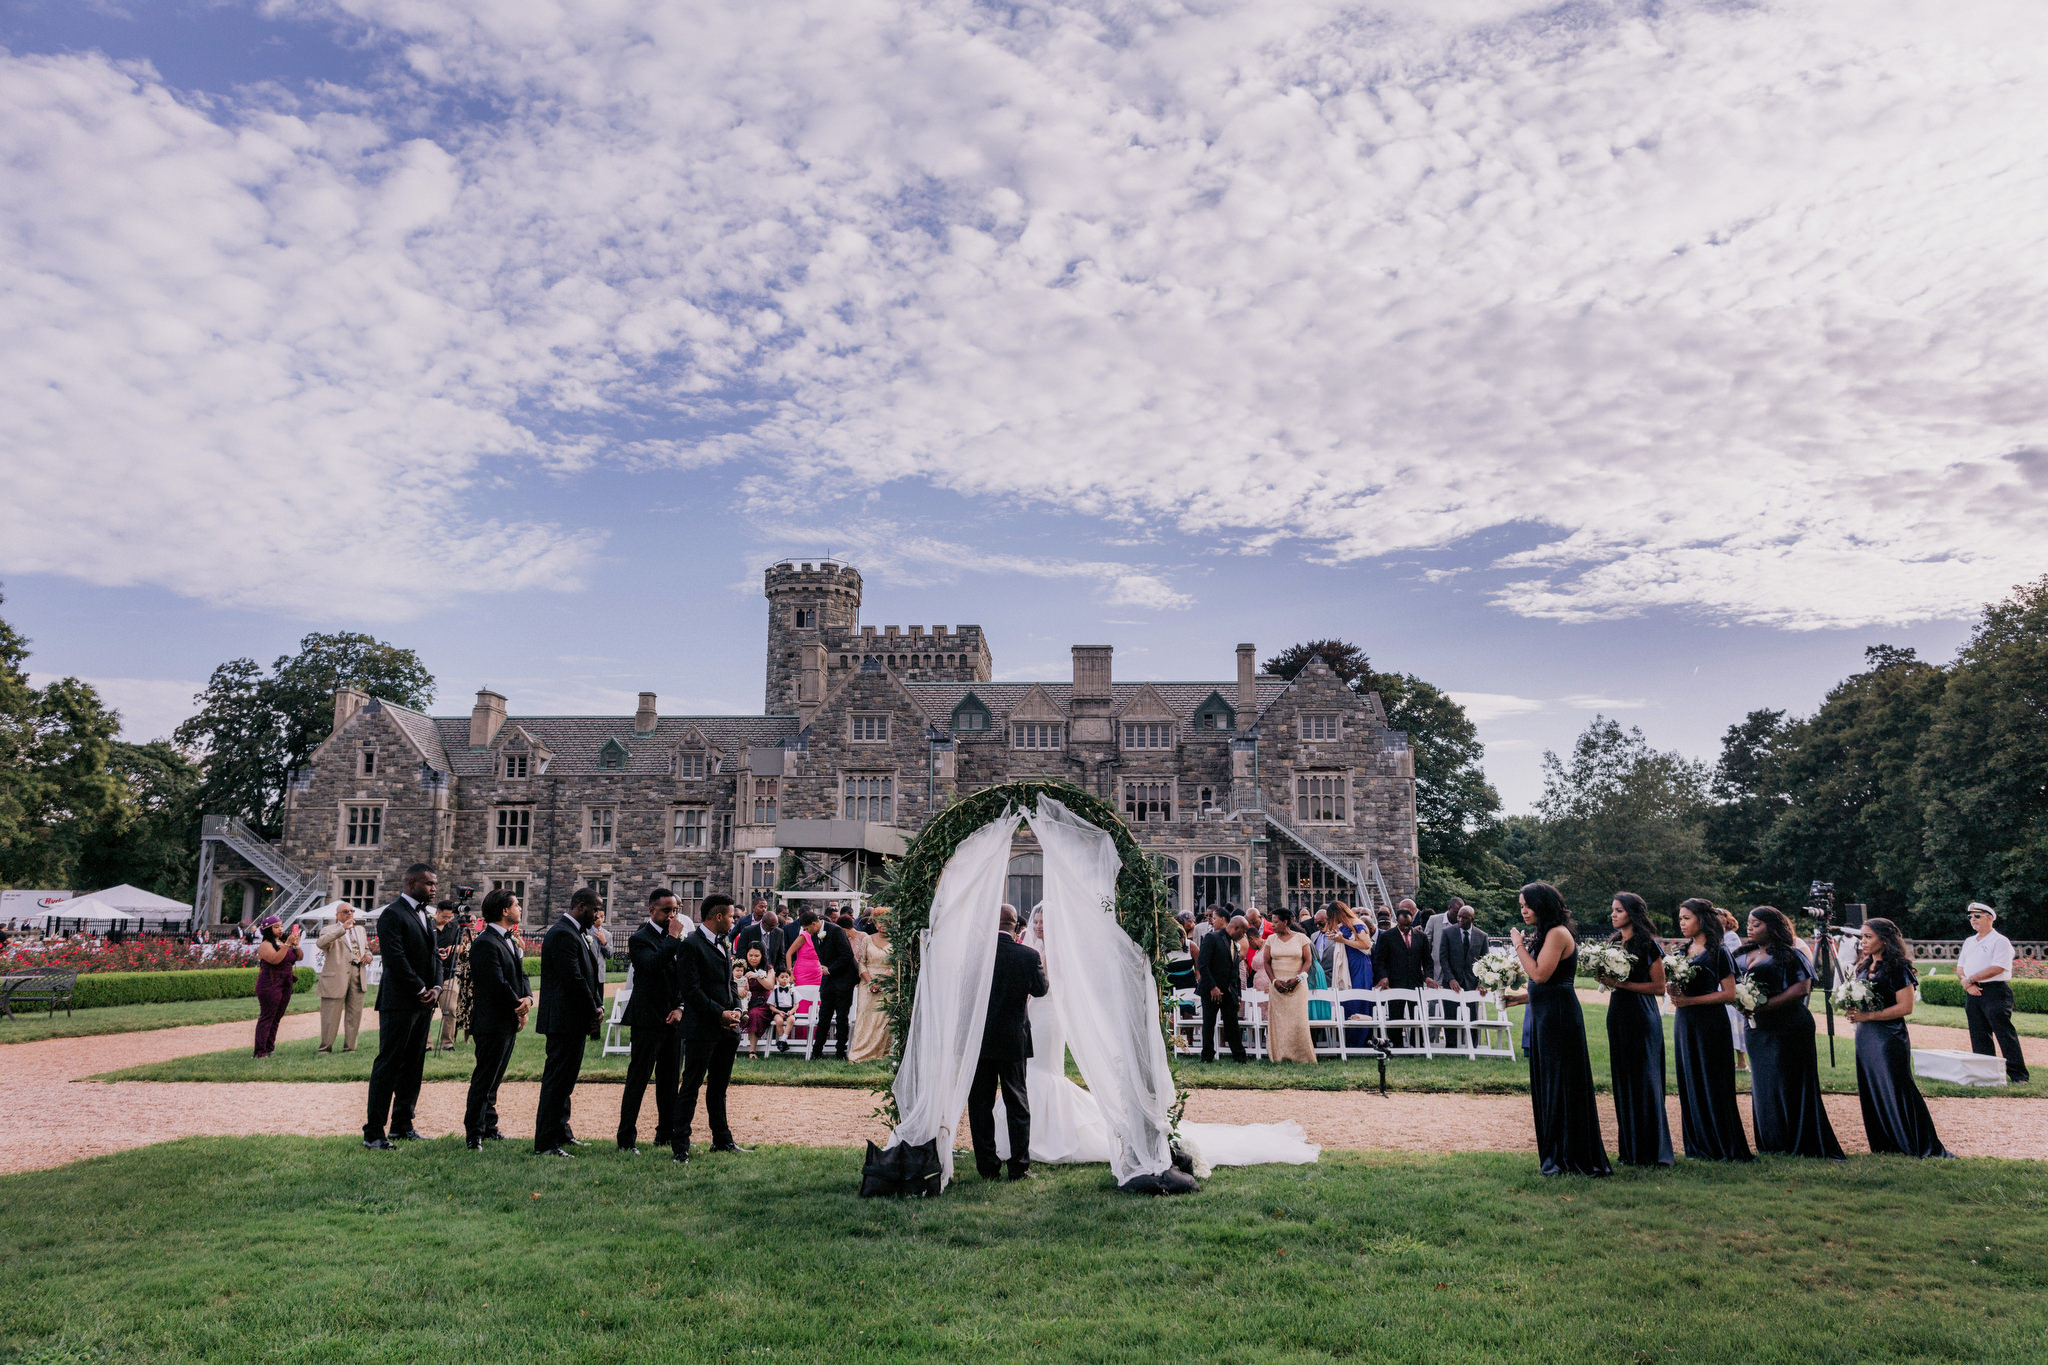 Wedding ceremony in front of Hempstead House castle in Sands Point New York